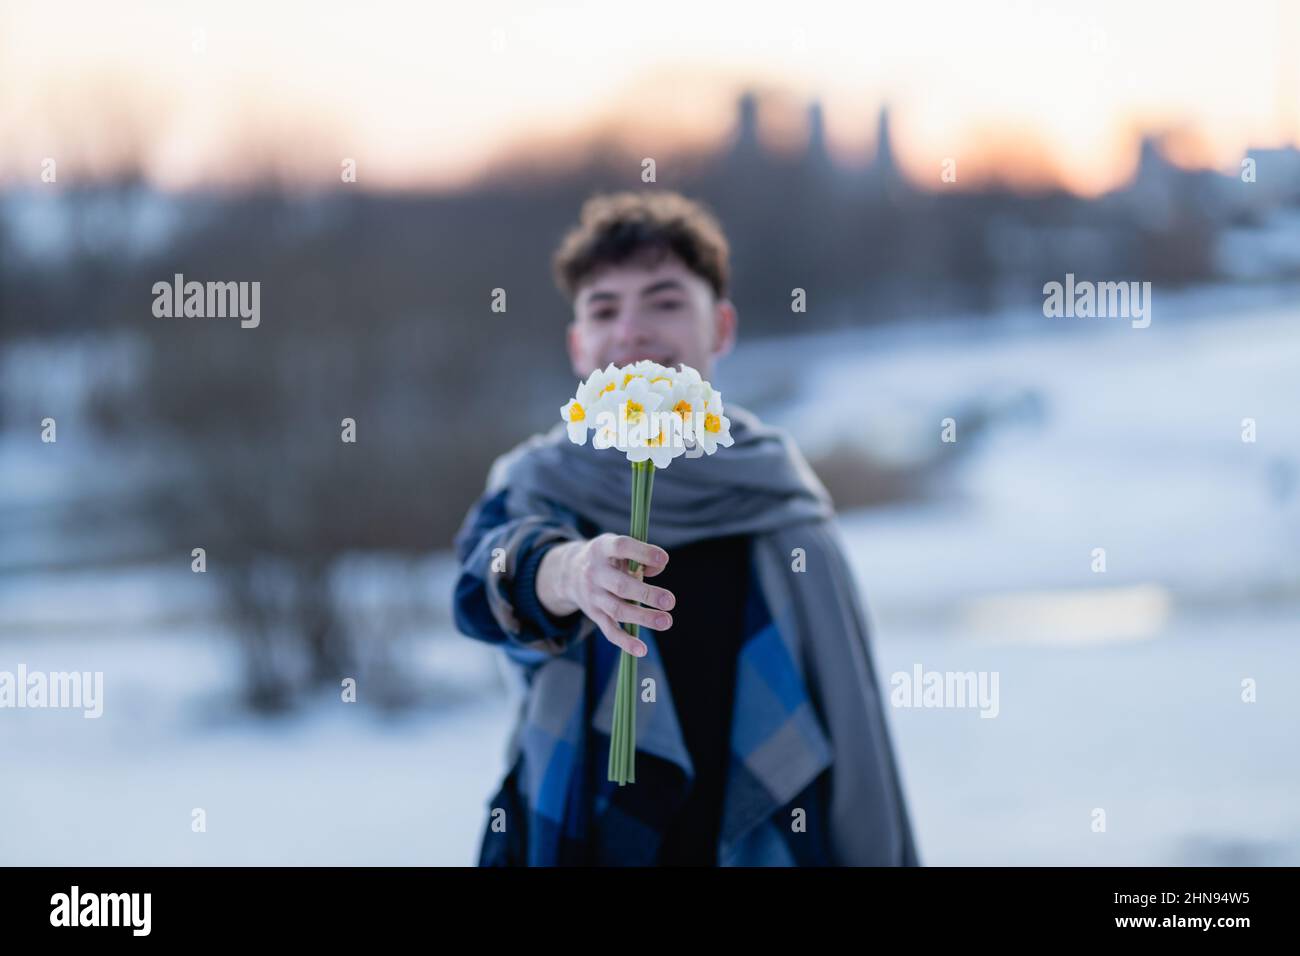 Portrait of a young man  against the backdrop of an industrial landscape in winter. Man holding a bouquet of daffodils. Selective focuse on flowers. Stock Photo